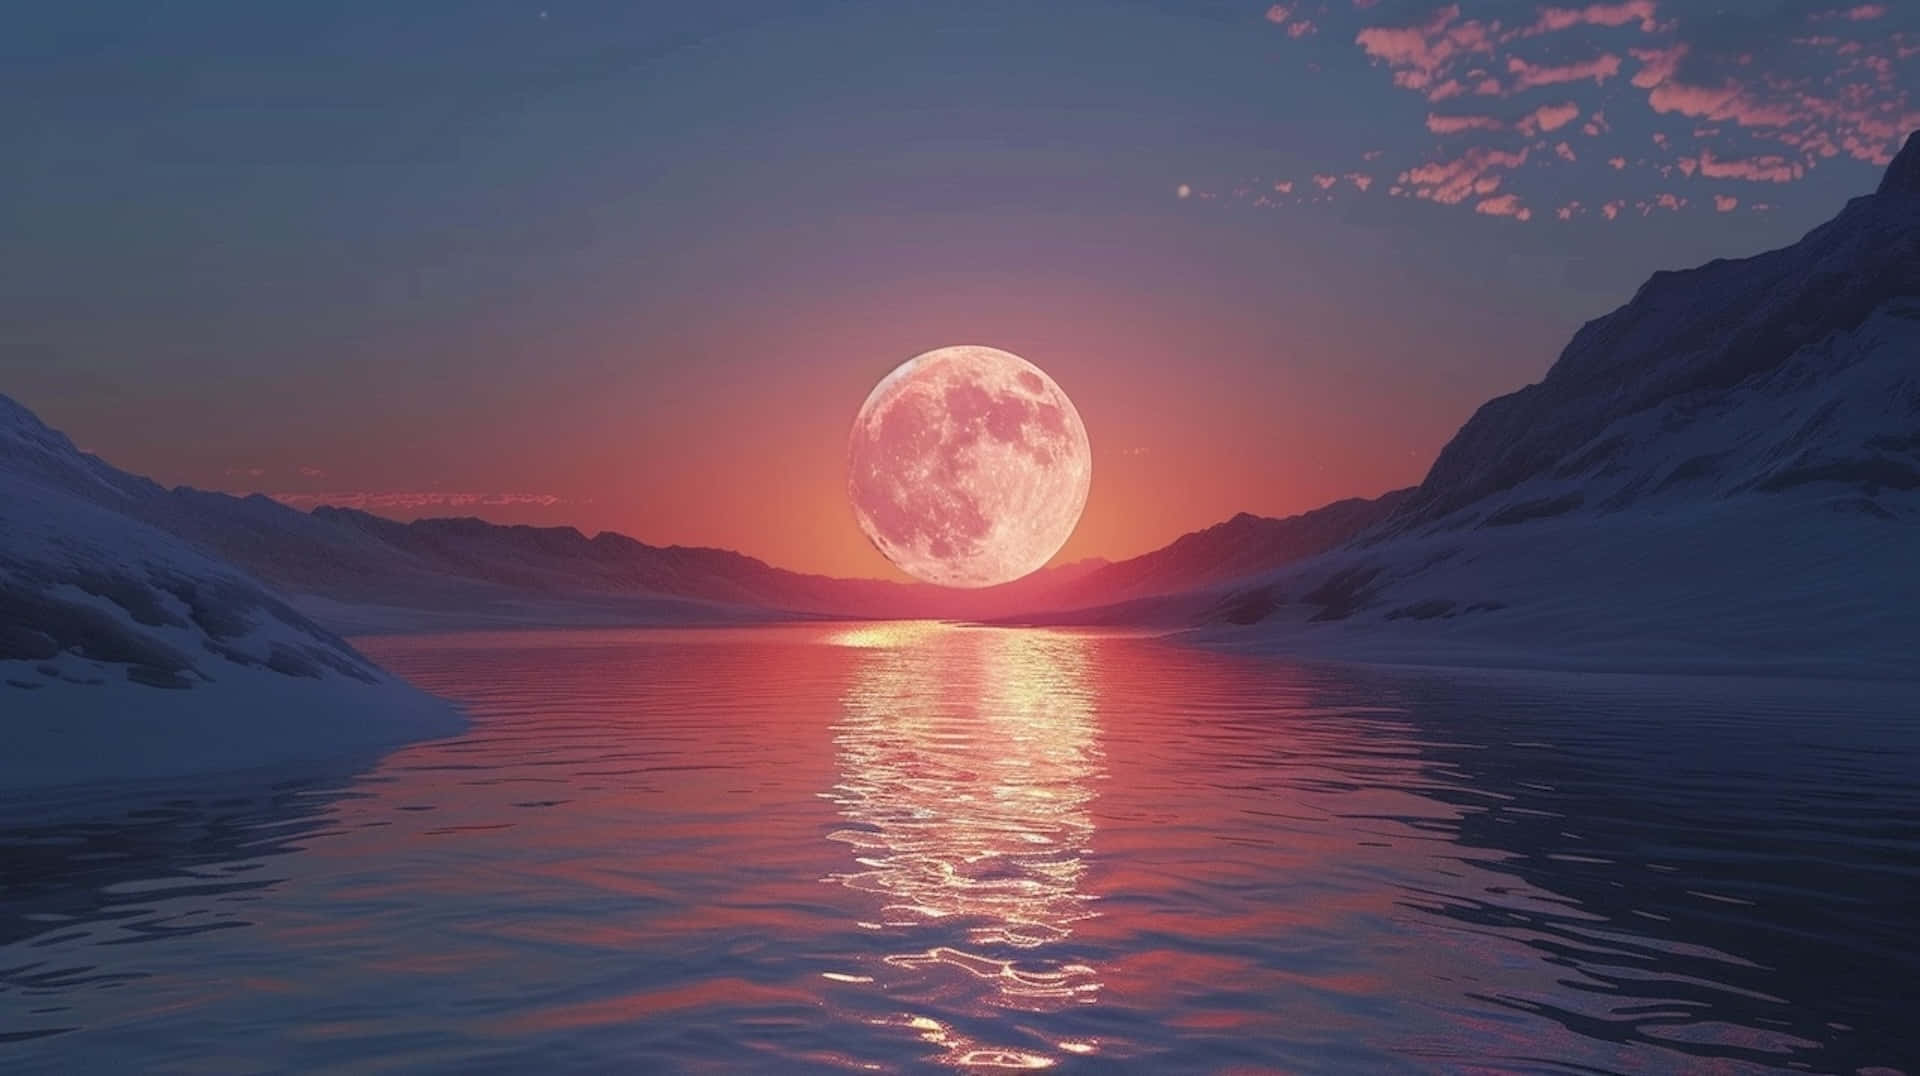 Spectacular Moonrise Over Snowy Mountain Lake Wallpaper